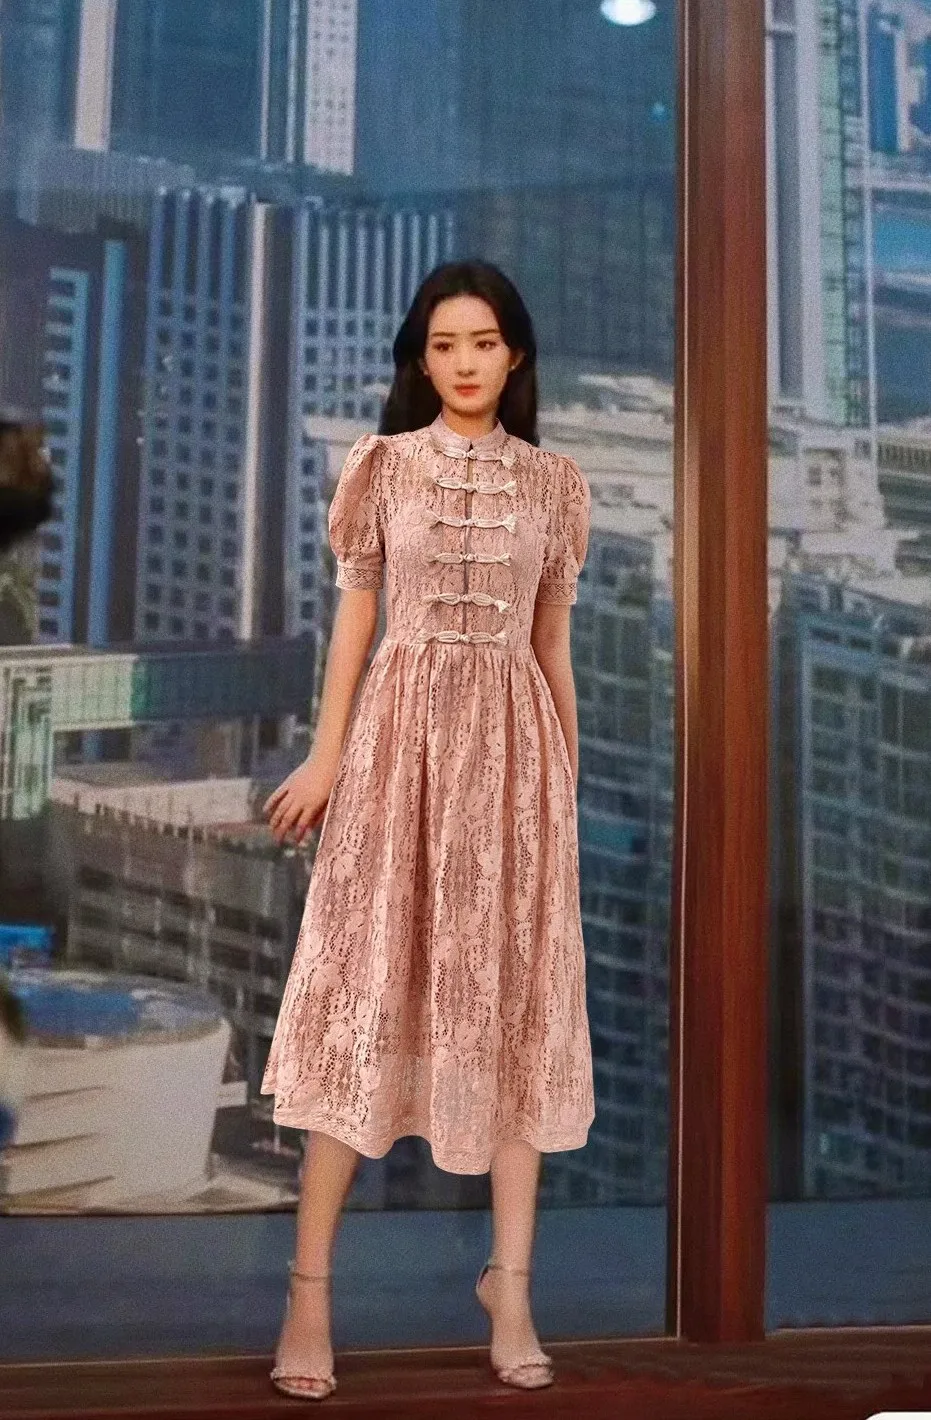 2023 spring and summer women's clothing fashion new Lace Plate Buckle Decoration Puff Sleeve Dress0609